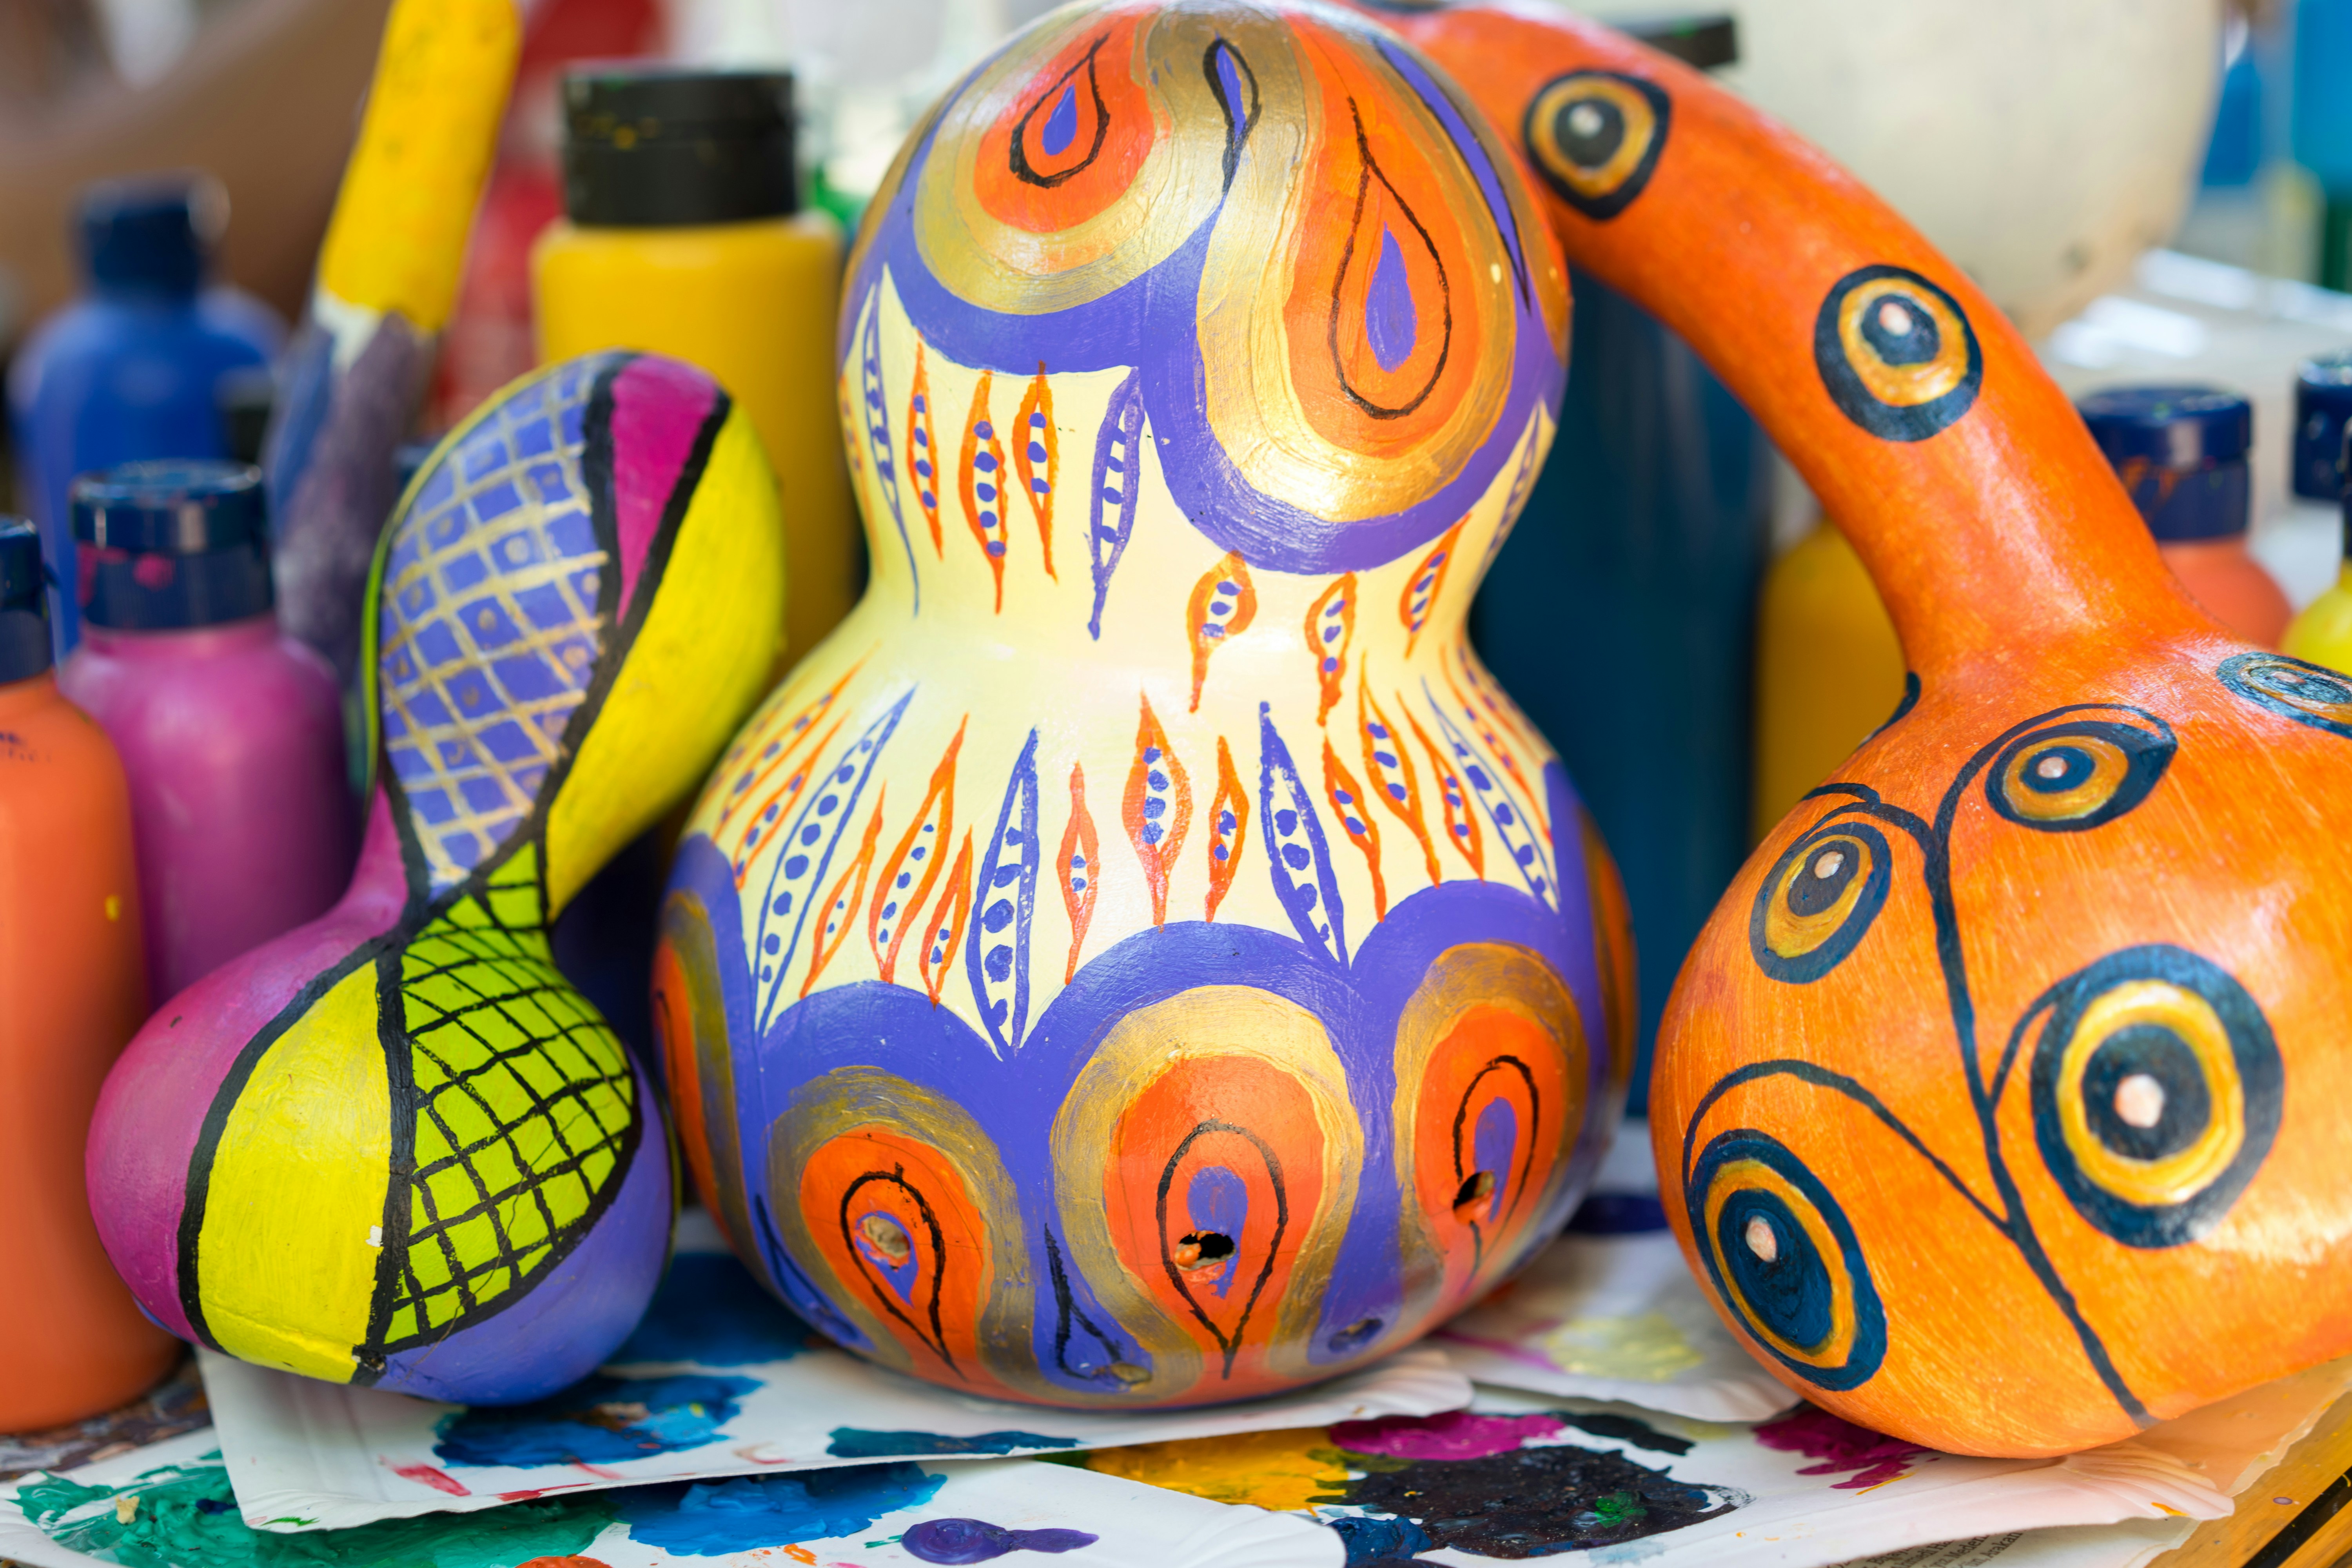 Paint on pumpkin shells: Antalya, Turkey - June 25, 2017. Paint on pumpkin shells - interesting element of interior design - lamps and shades, covered with patterns and pictures